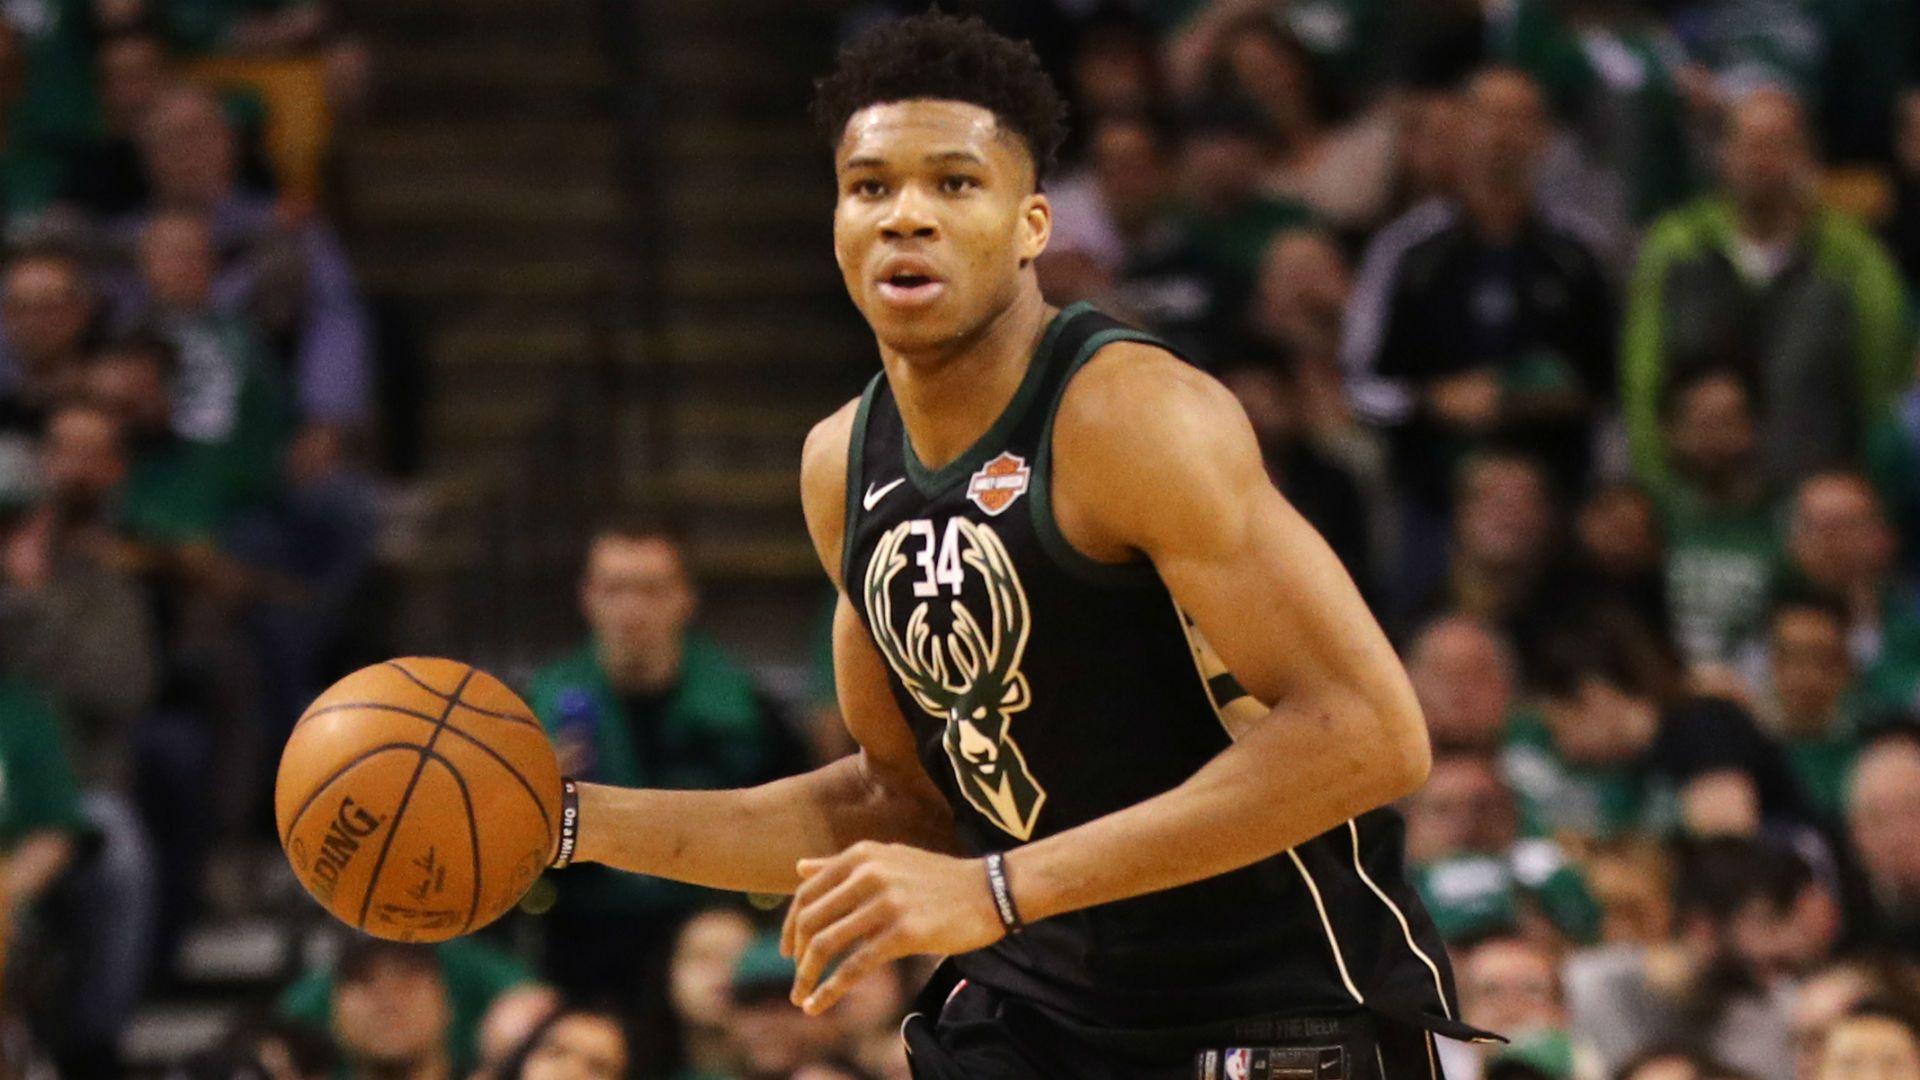 Giannis Antetokounmpo says 'Hell, no' to Instagram live question